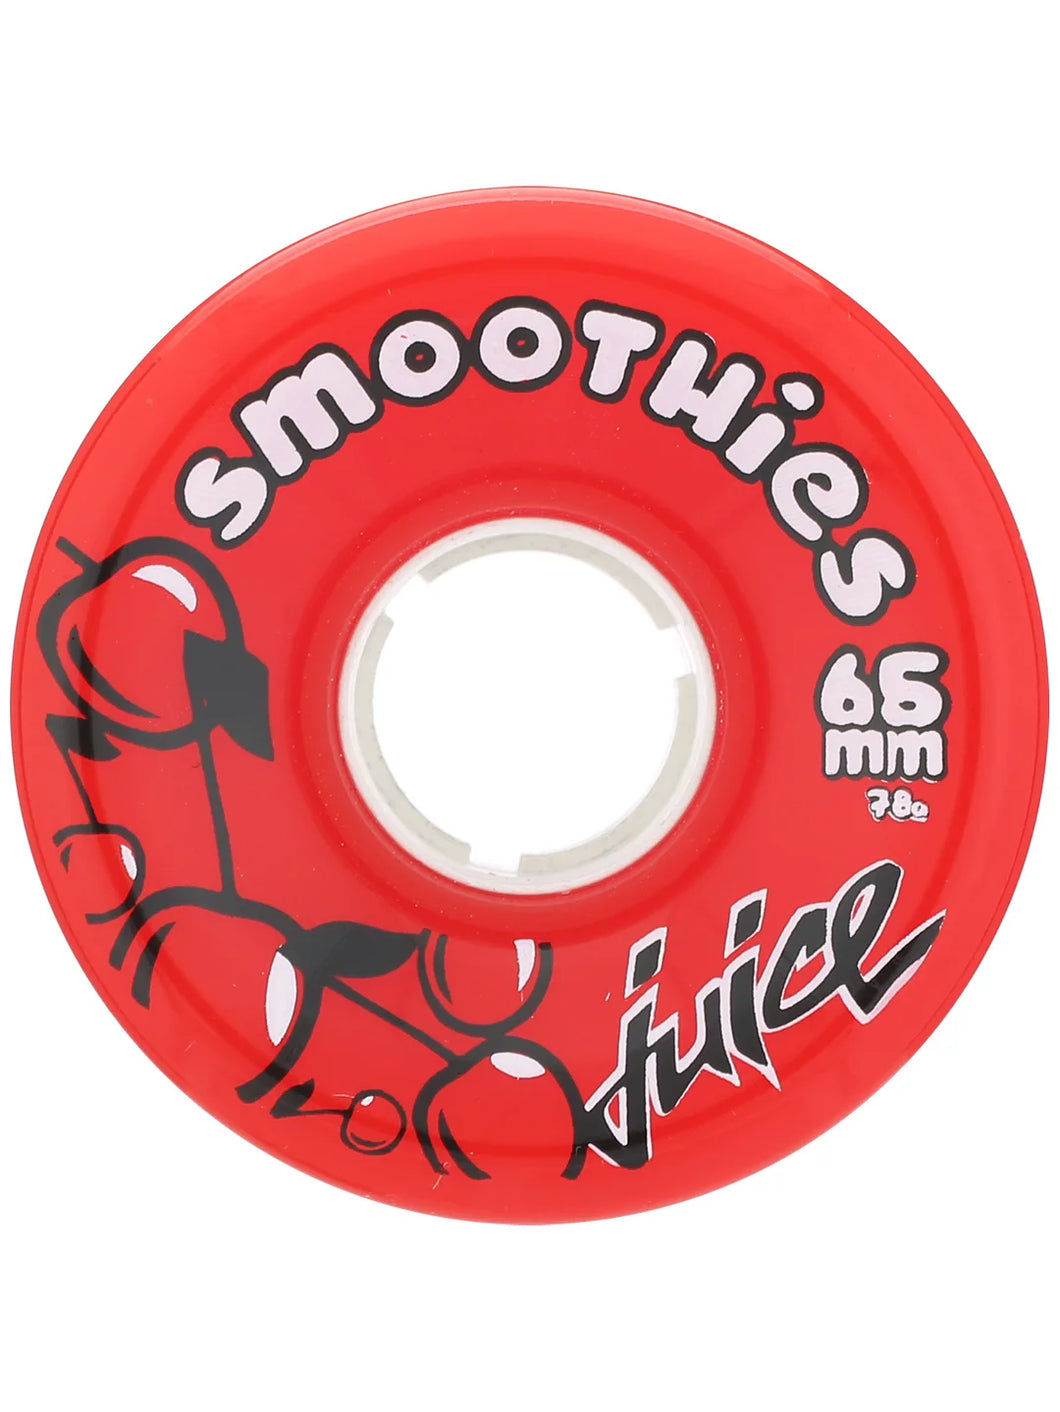 Juice Smoothie Quad Outdoor Wheels (7 Color Variants) - 4 Pack